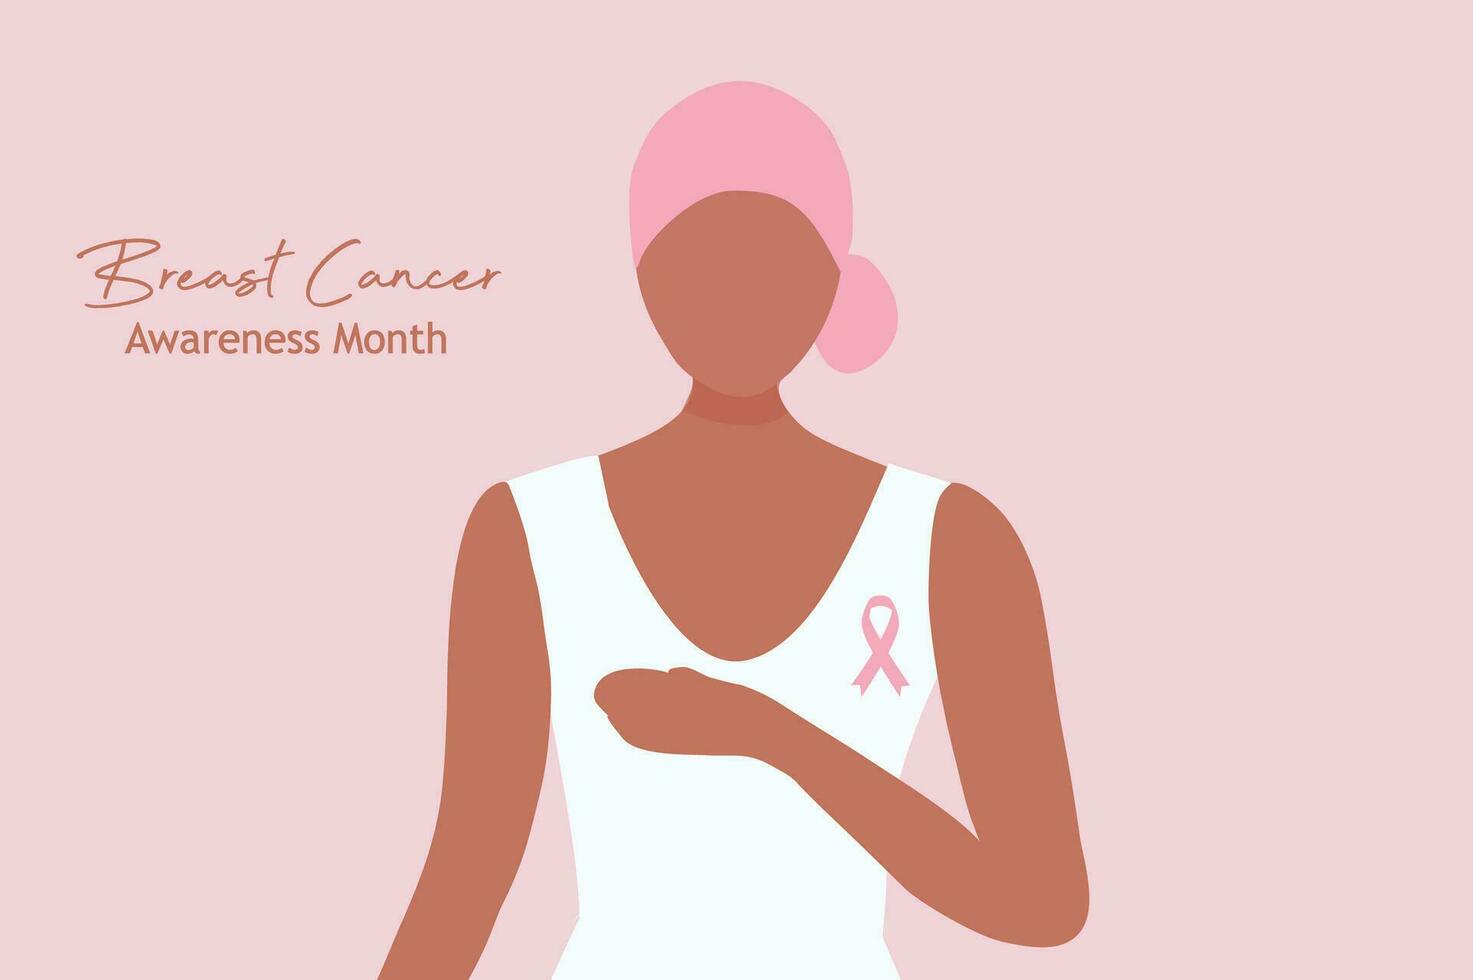 Breast cancer awareness for love and support. Beautiful young women touching her breast with pink ribbon brooch vector illustration. Breast cancer concept background